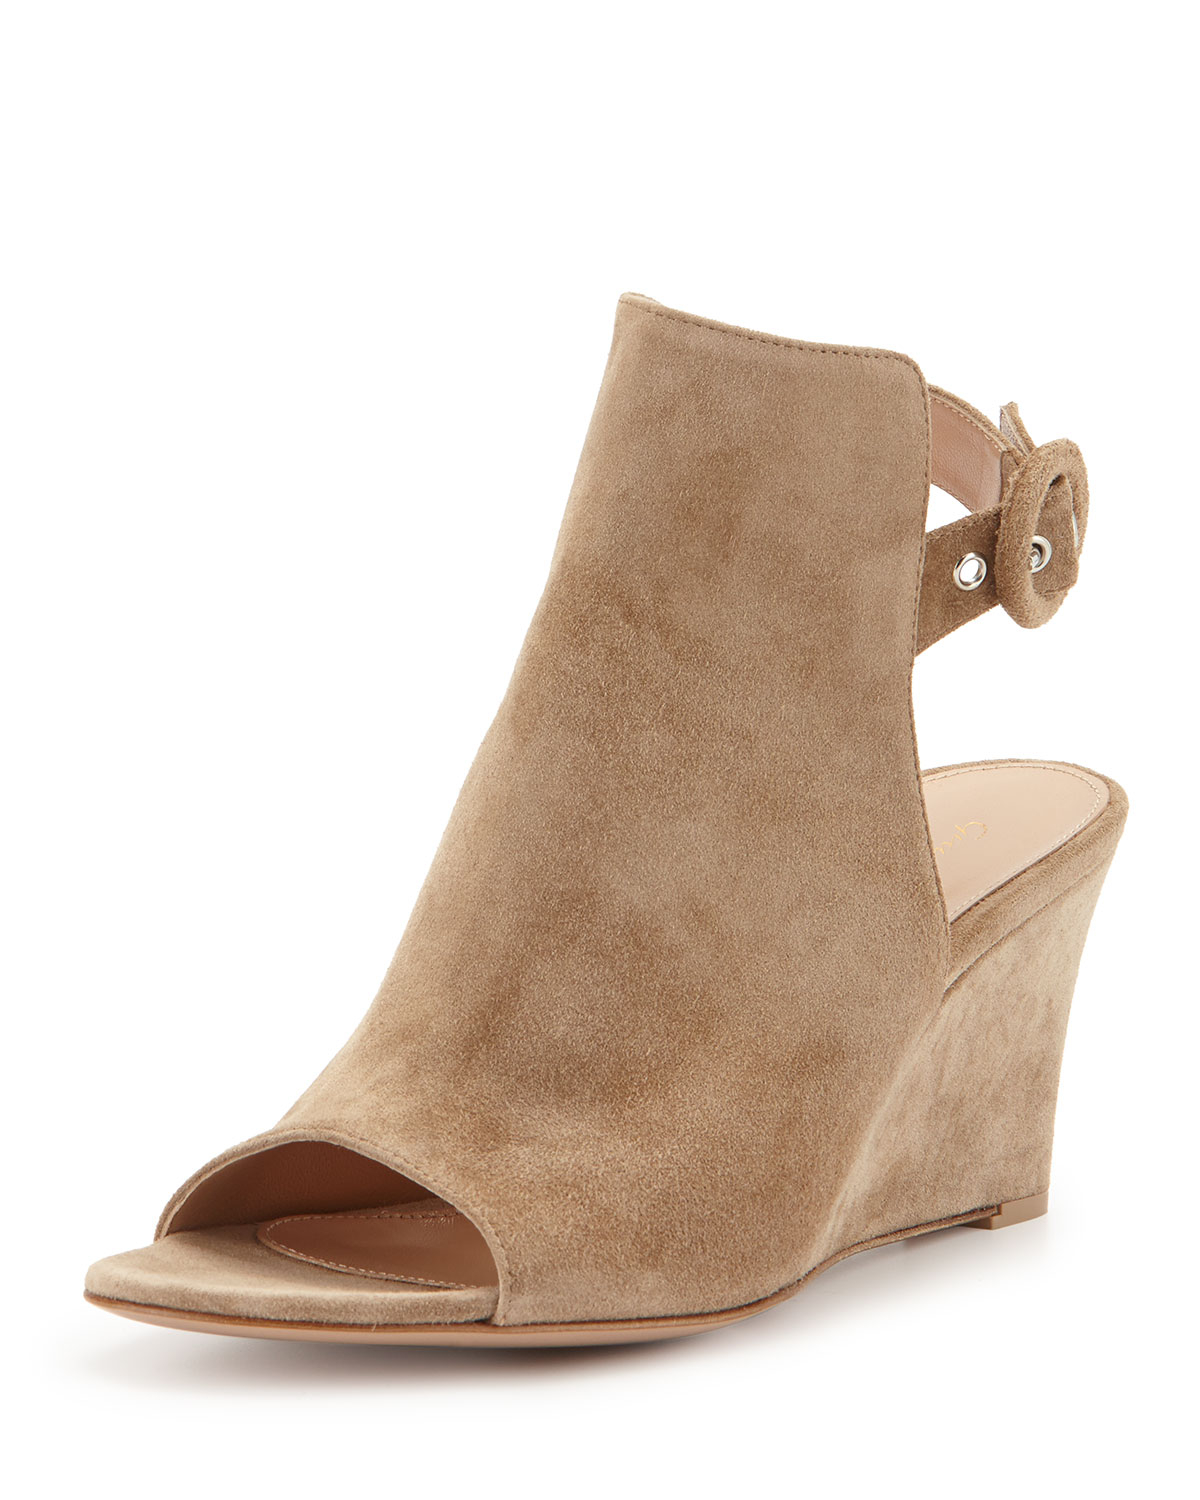 Lyst - Gianvito Rossi Open-toe Slingback Wedge Bootie in Natural